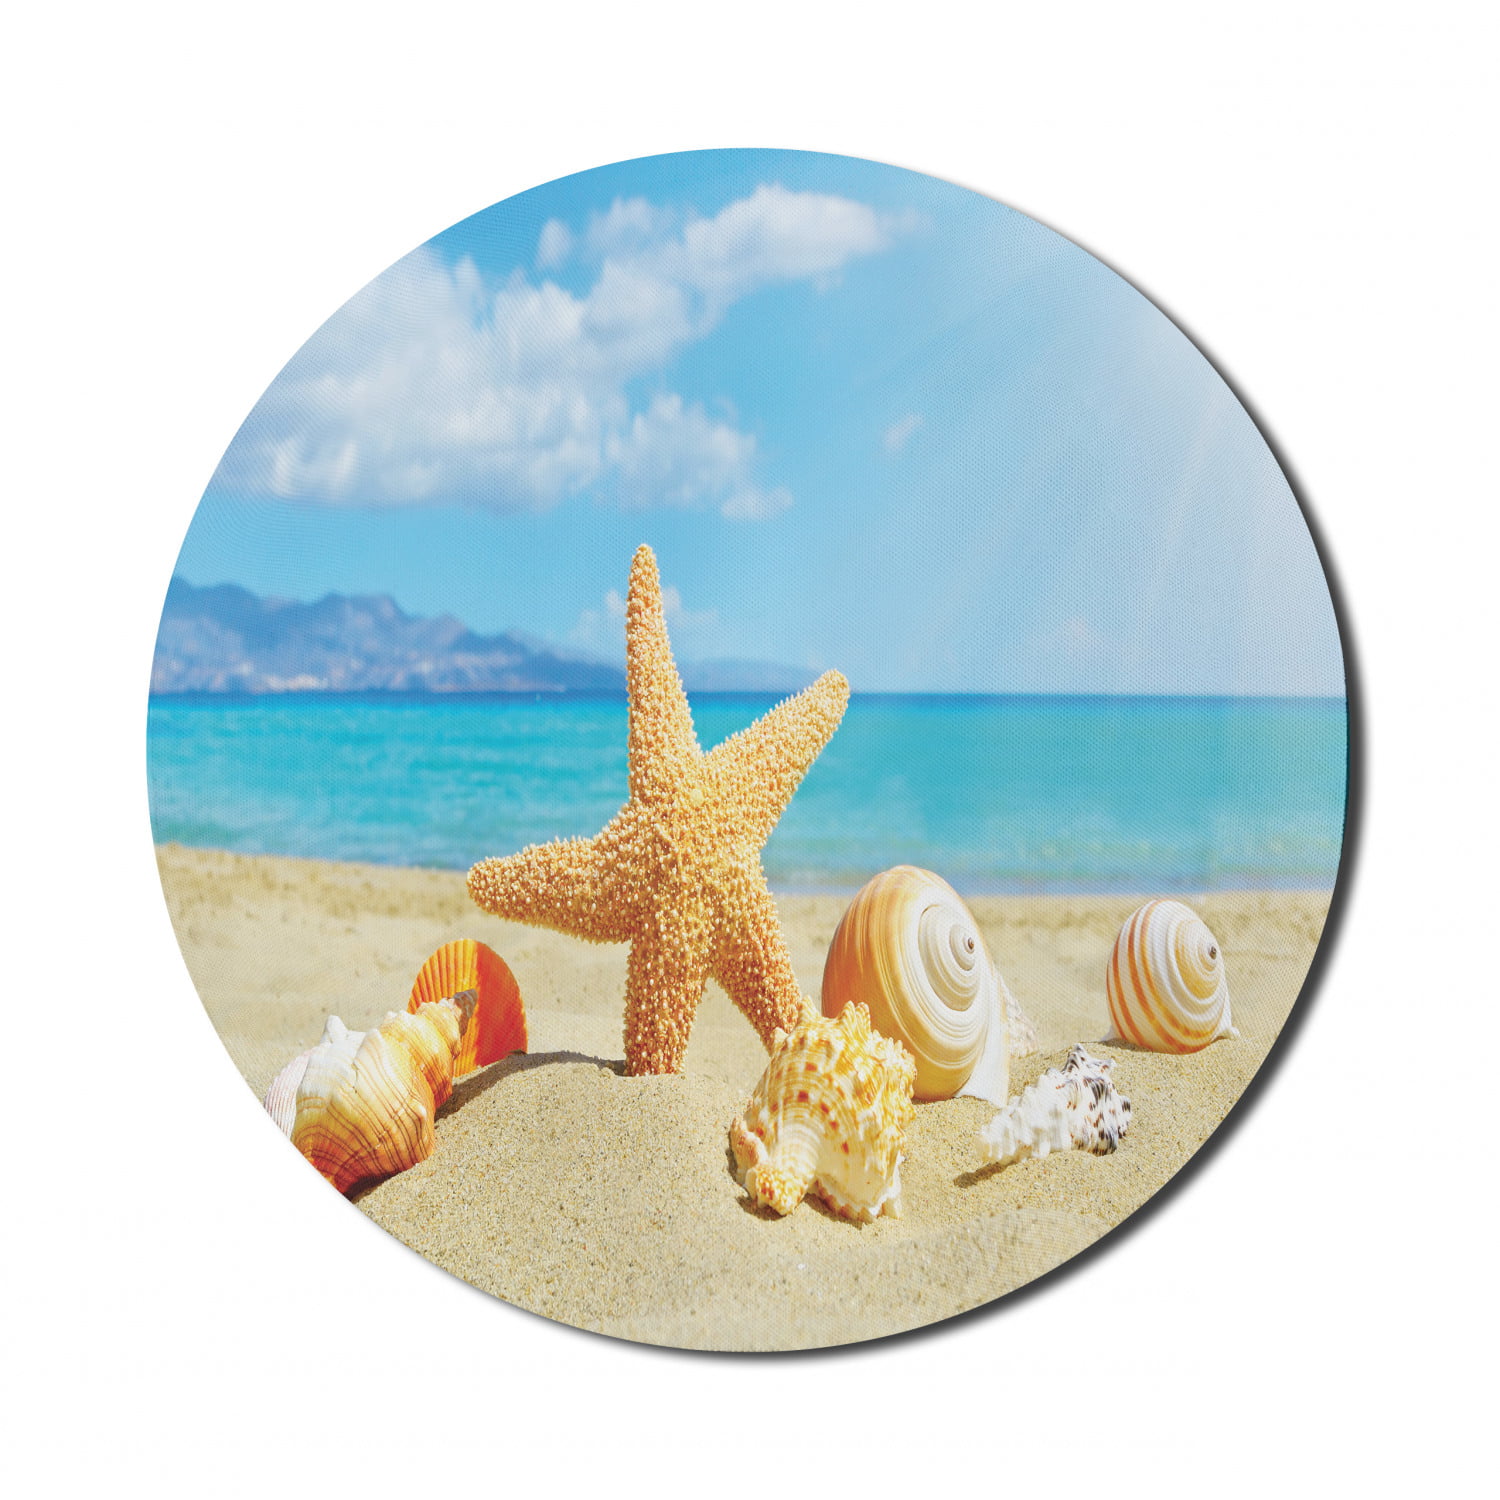 1 X Scenic Beach Ocean Sand Round Mousepad Mouse Pad Great Gift Idea